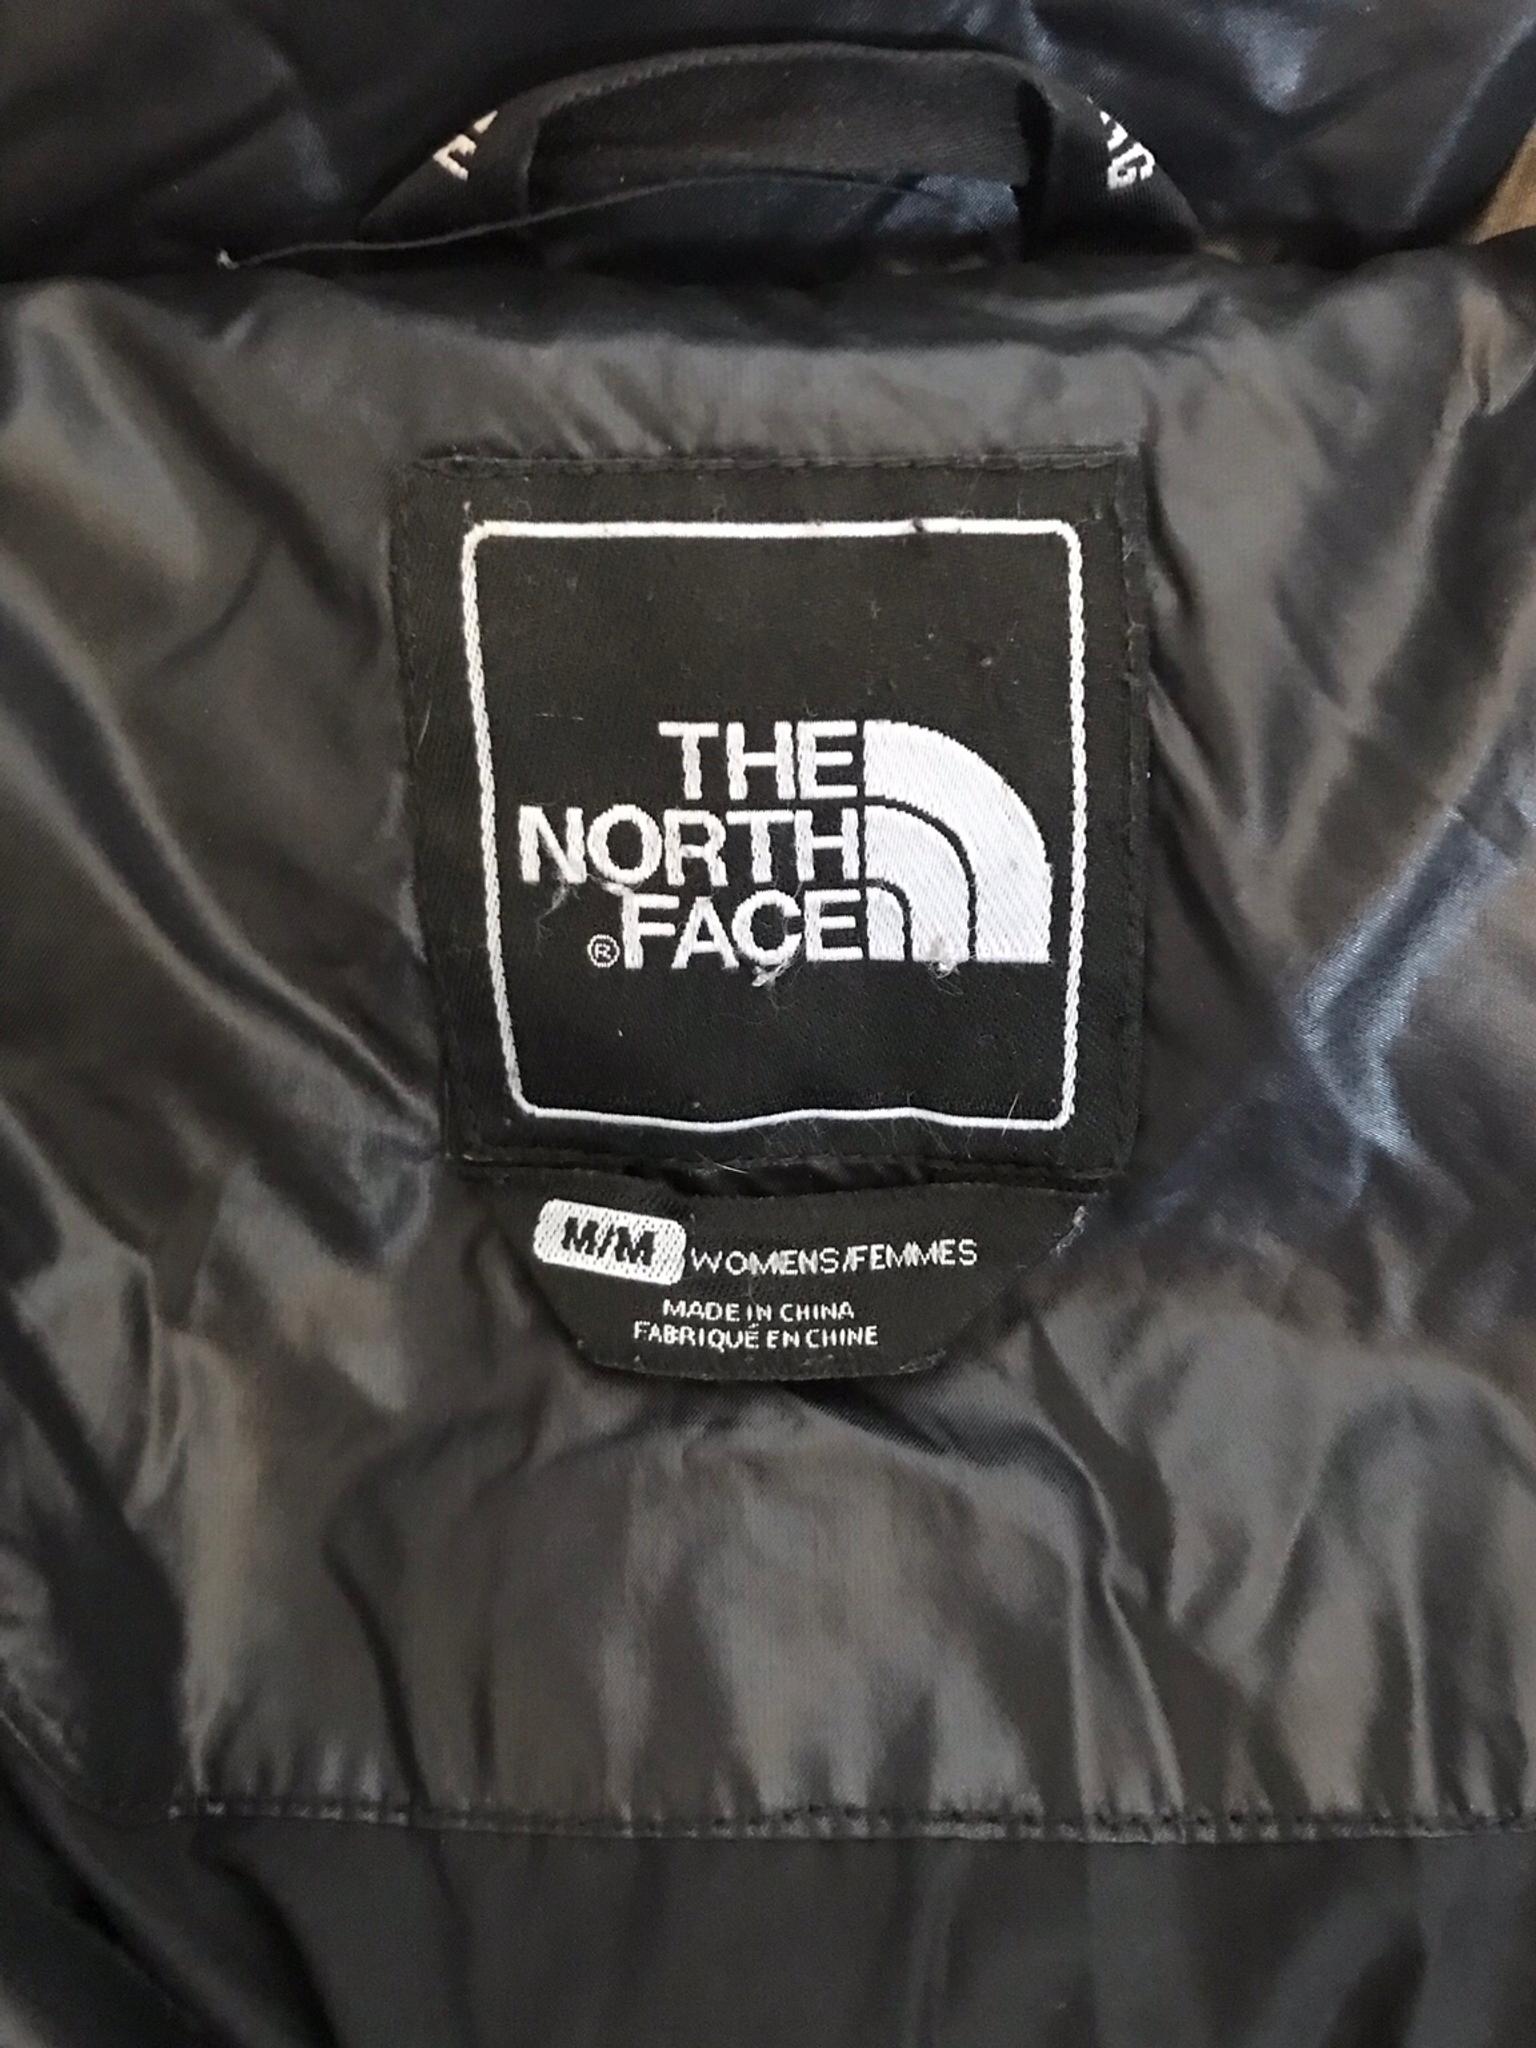 the north face jacket with fleece inside